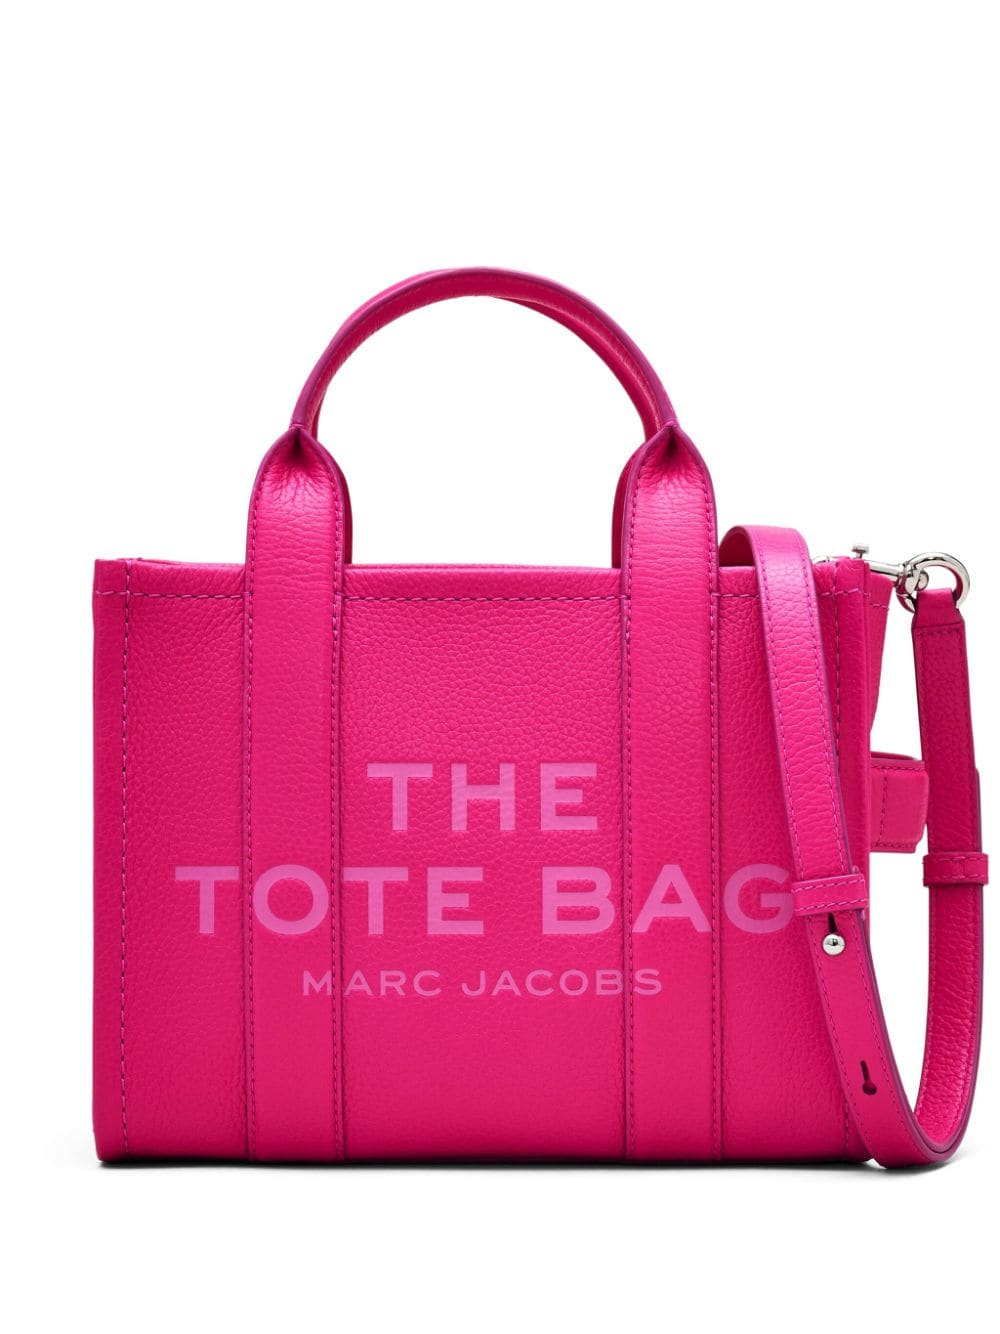 The Small Leather tote